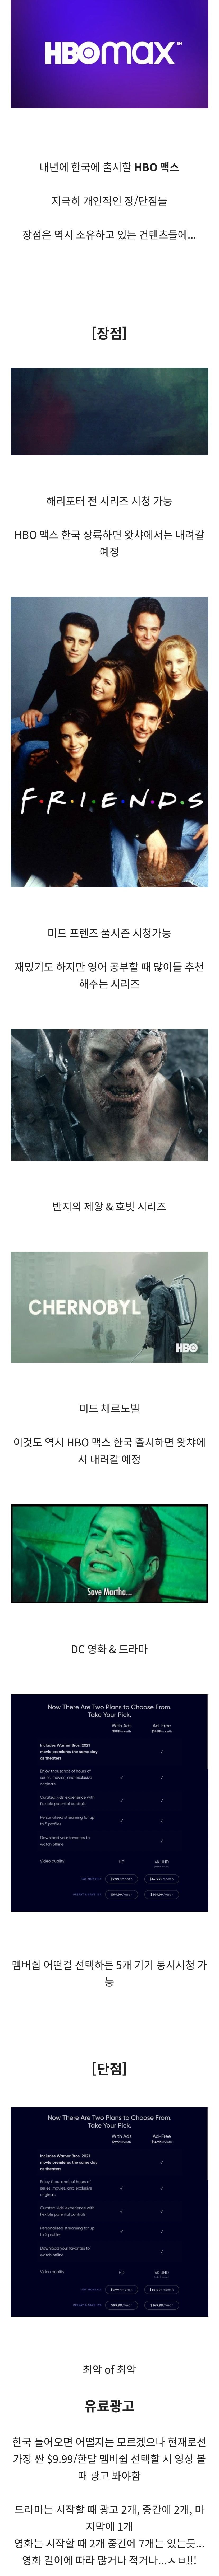 Pros and cons of hbo max landing in Korea soon